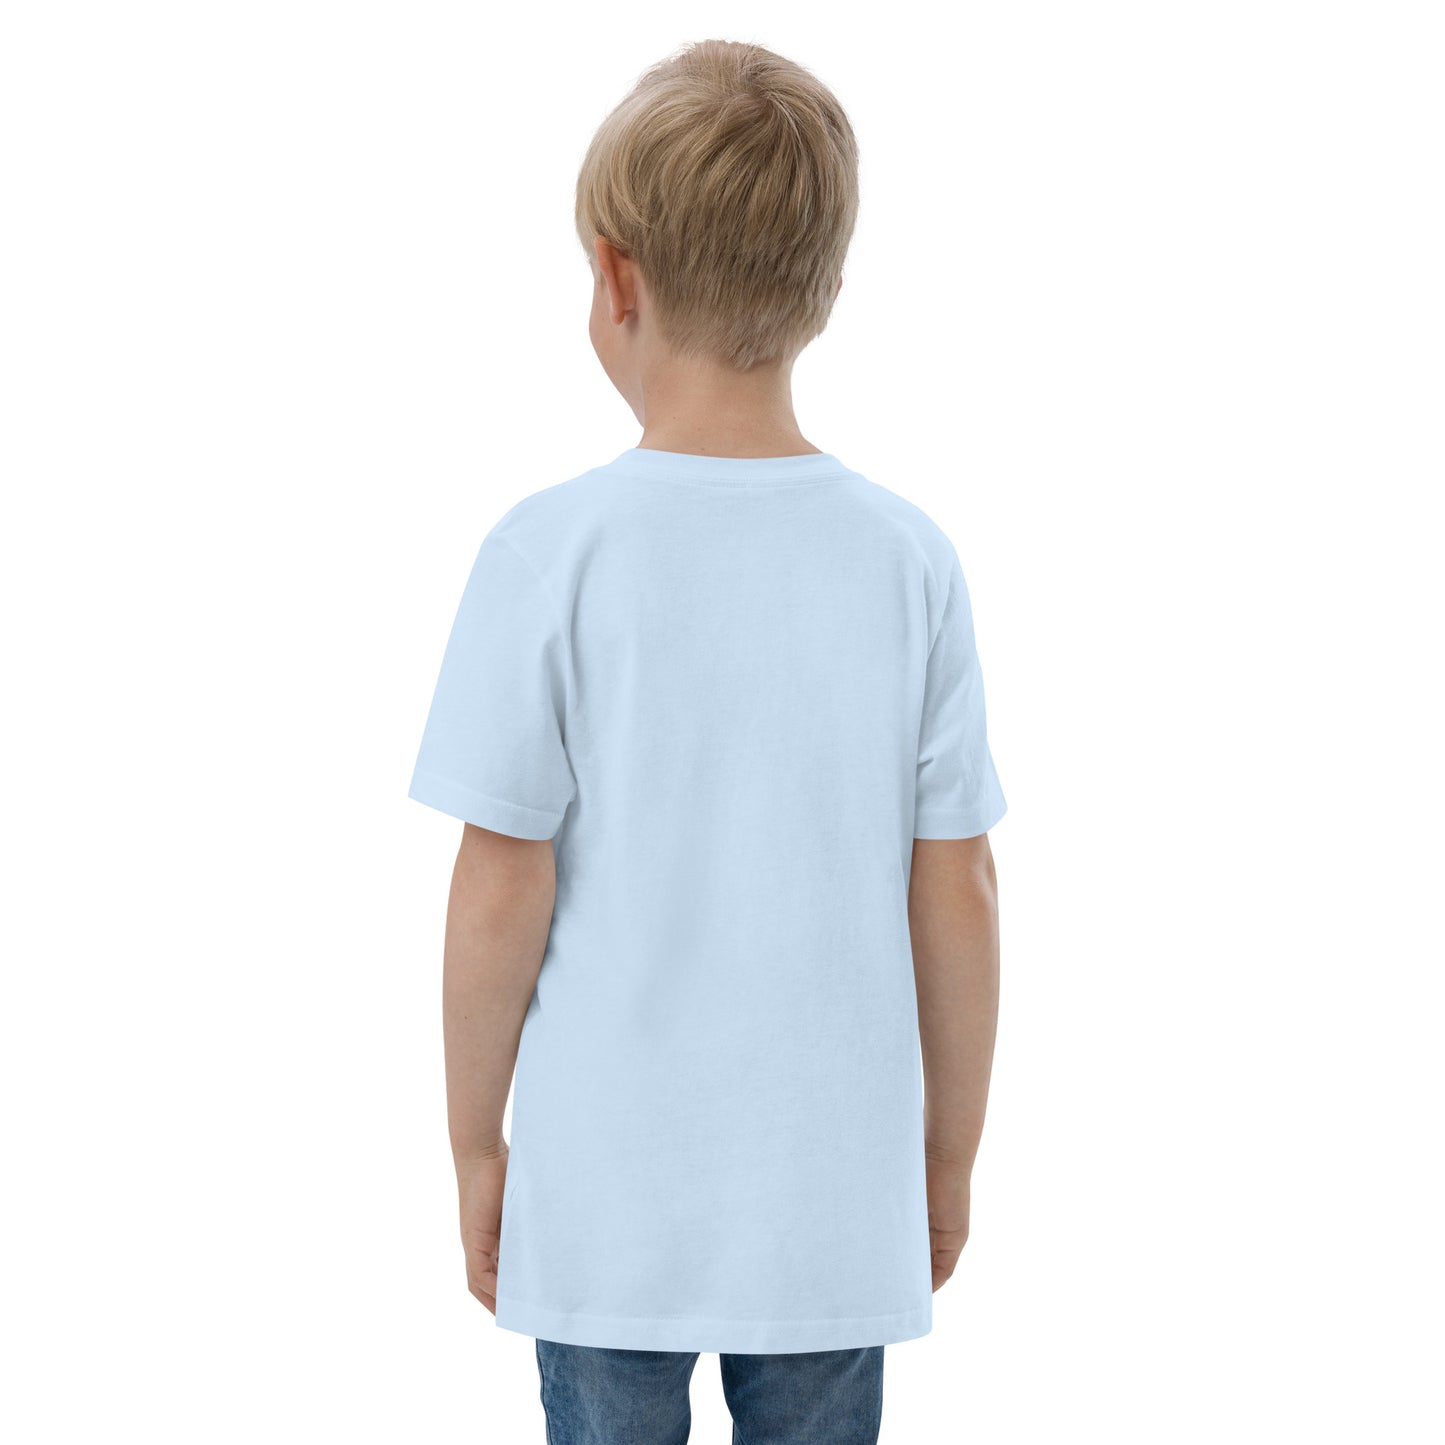  Kids T-Shirt - Light Blue - Back view, being warn on boy standing with his arms by his side - Go Sea Kayak Byron Bay logo on front - Genuine Byron Bay Merchandise | Produced by Go Sea Kayak Byron Bay 